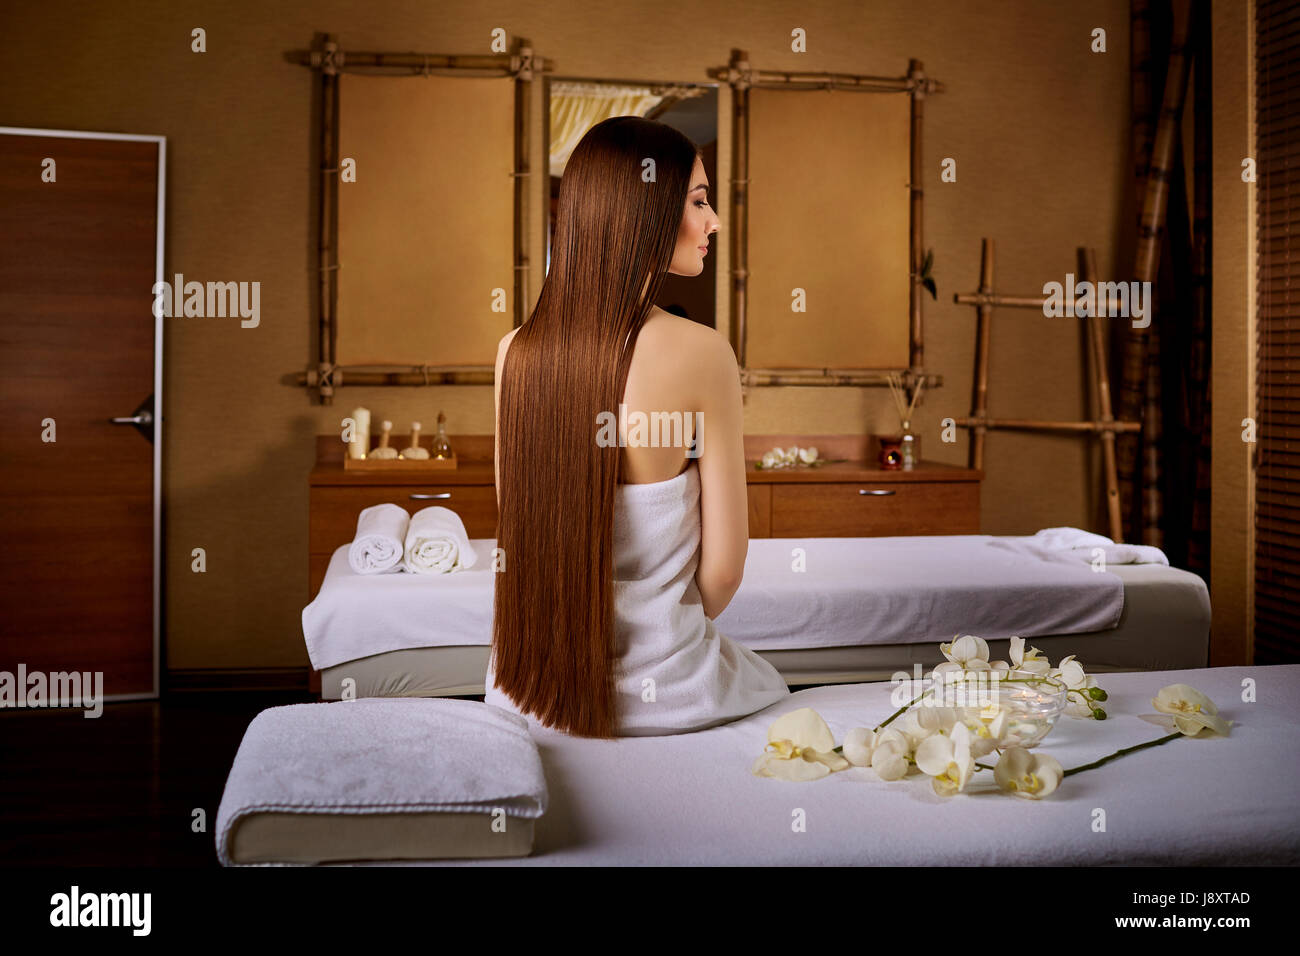 Woman with beautiful long hair sitting on massage chair in spa s Stock Photo